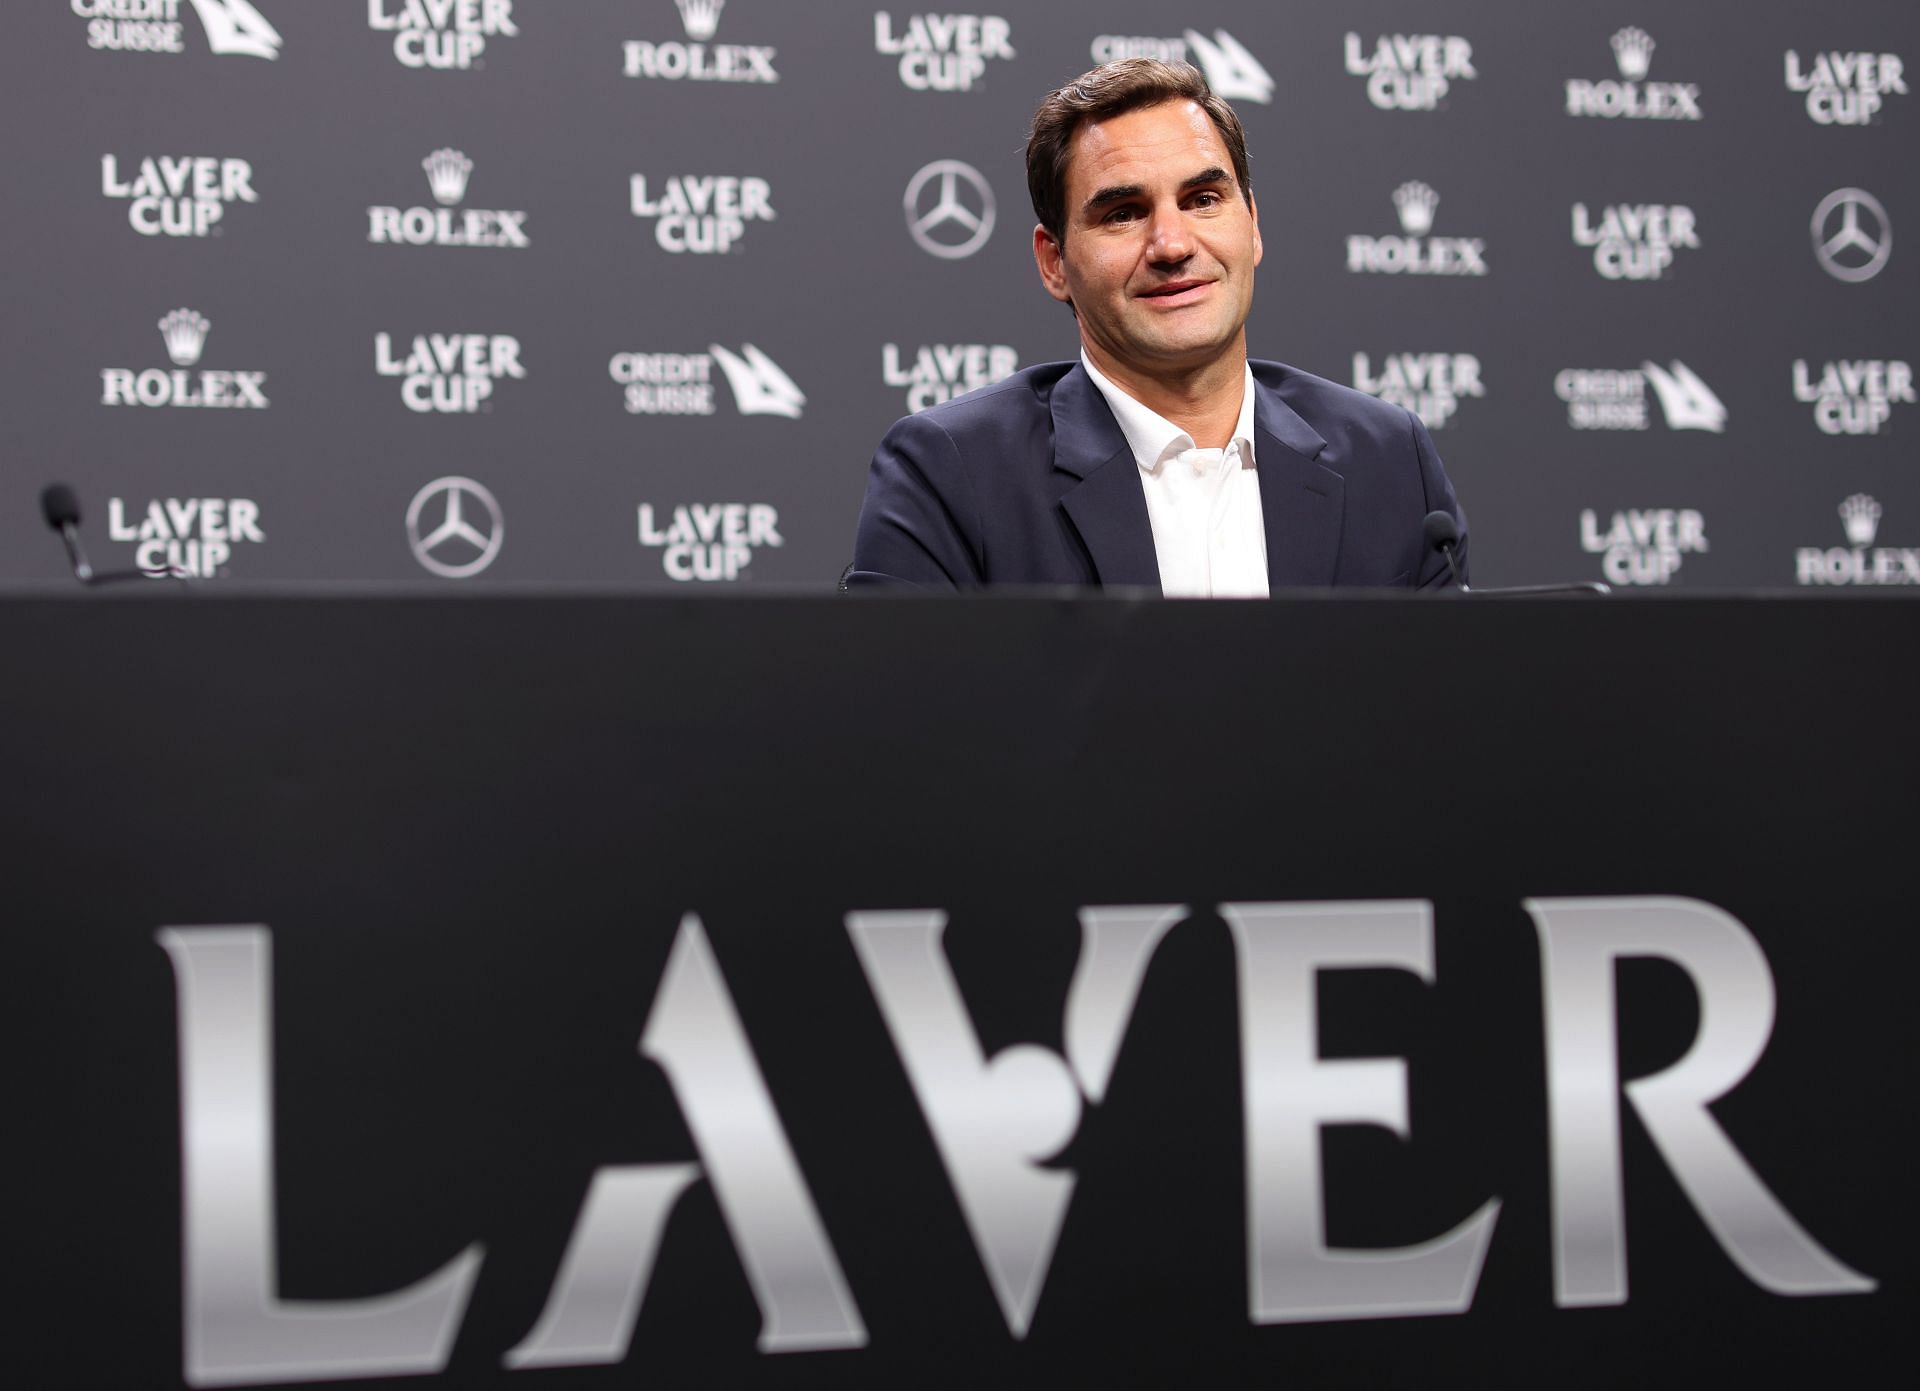 Roger Federer talks to the media during a press conference ahead of the 2022 Laver Cup.